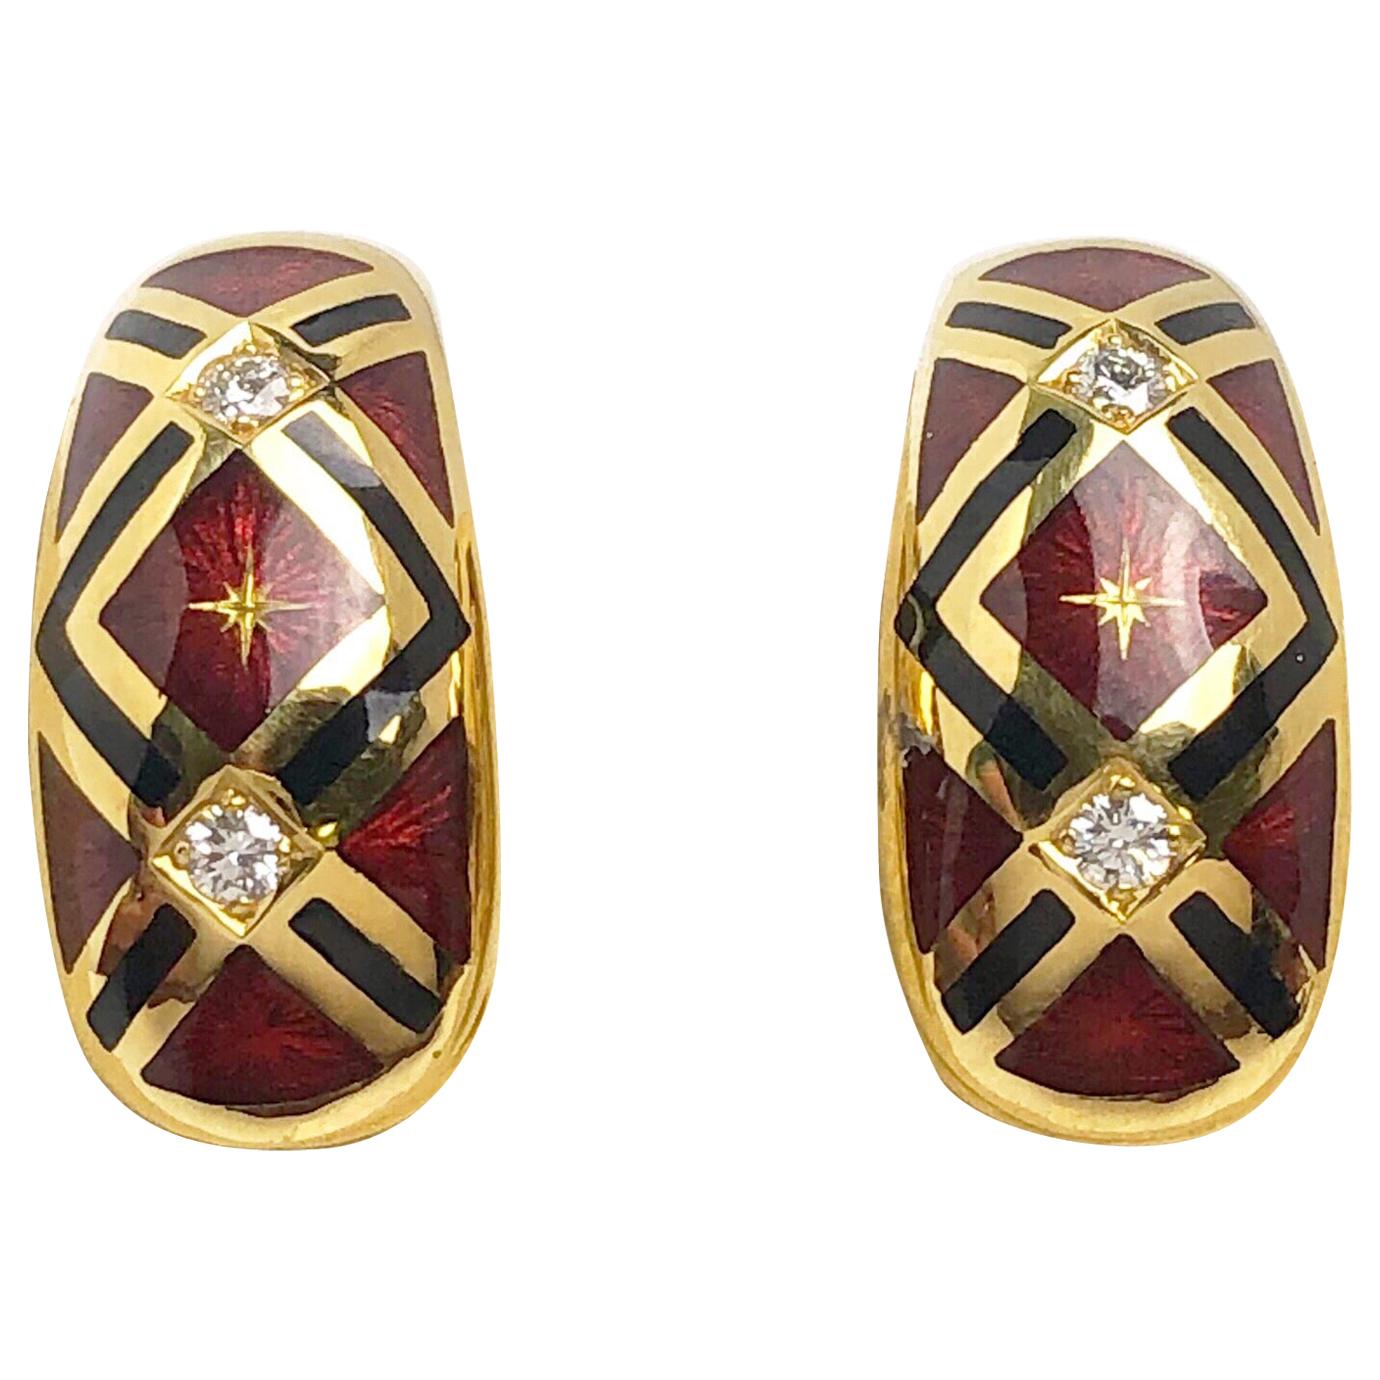 Faberge 18 Karat Gold, Red Enamel and Diamond Earrings with Certificate